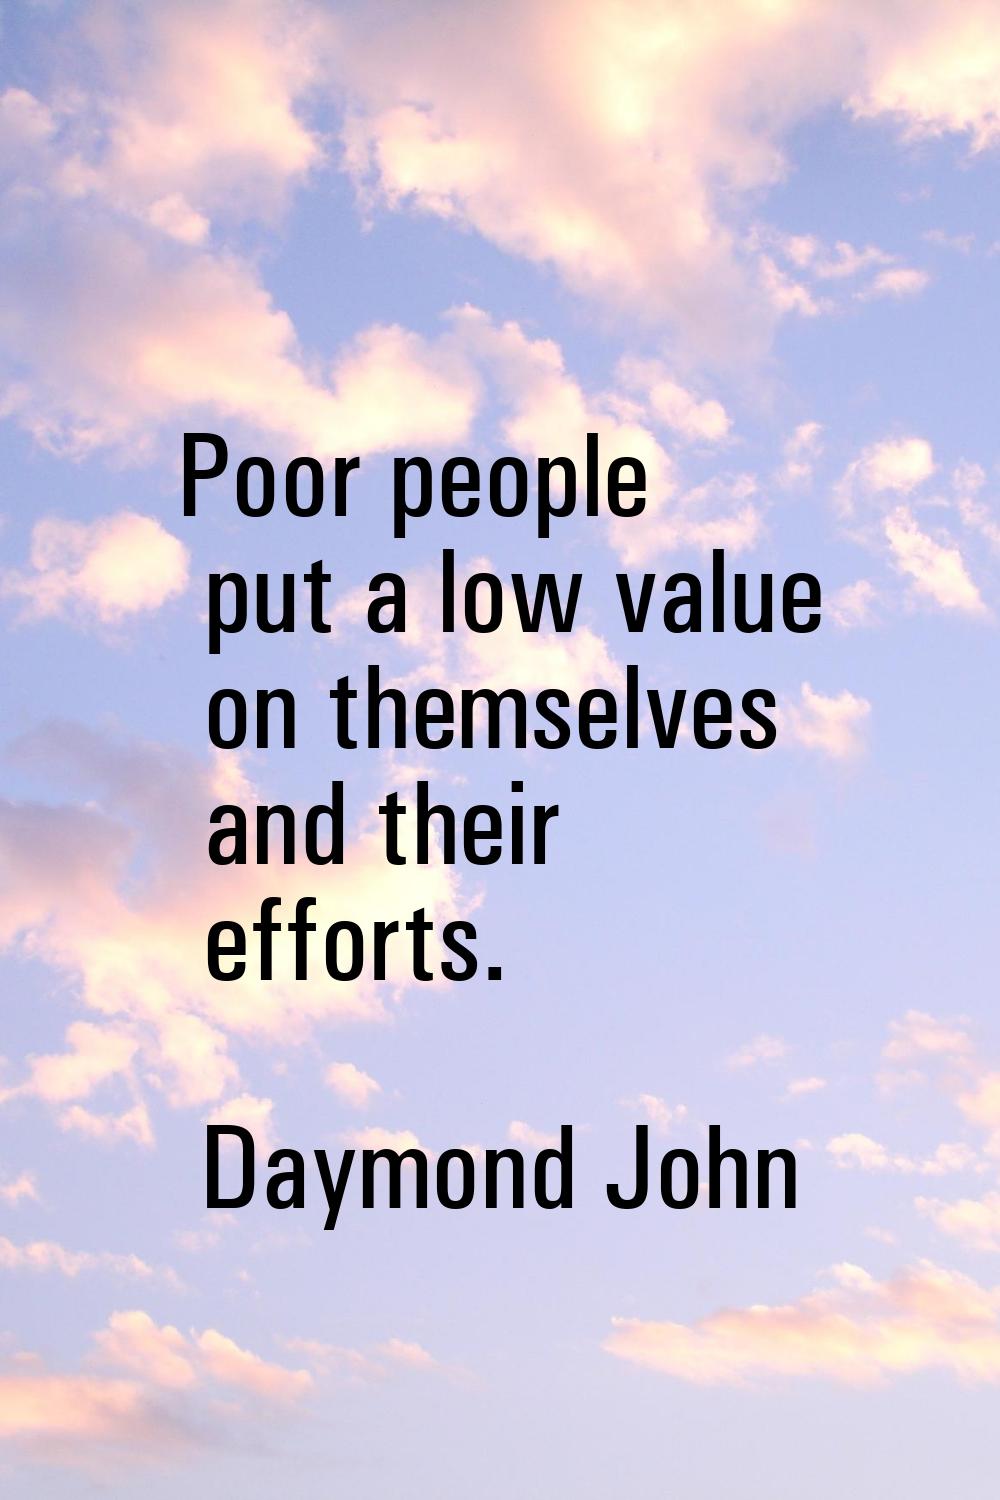 Poor people put a low value on themselves and their efforts.